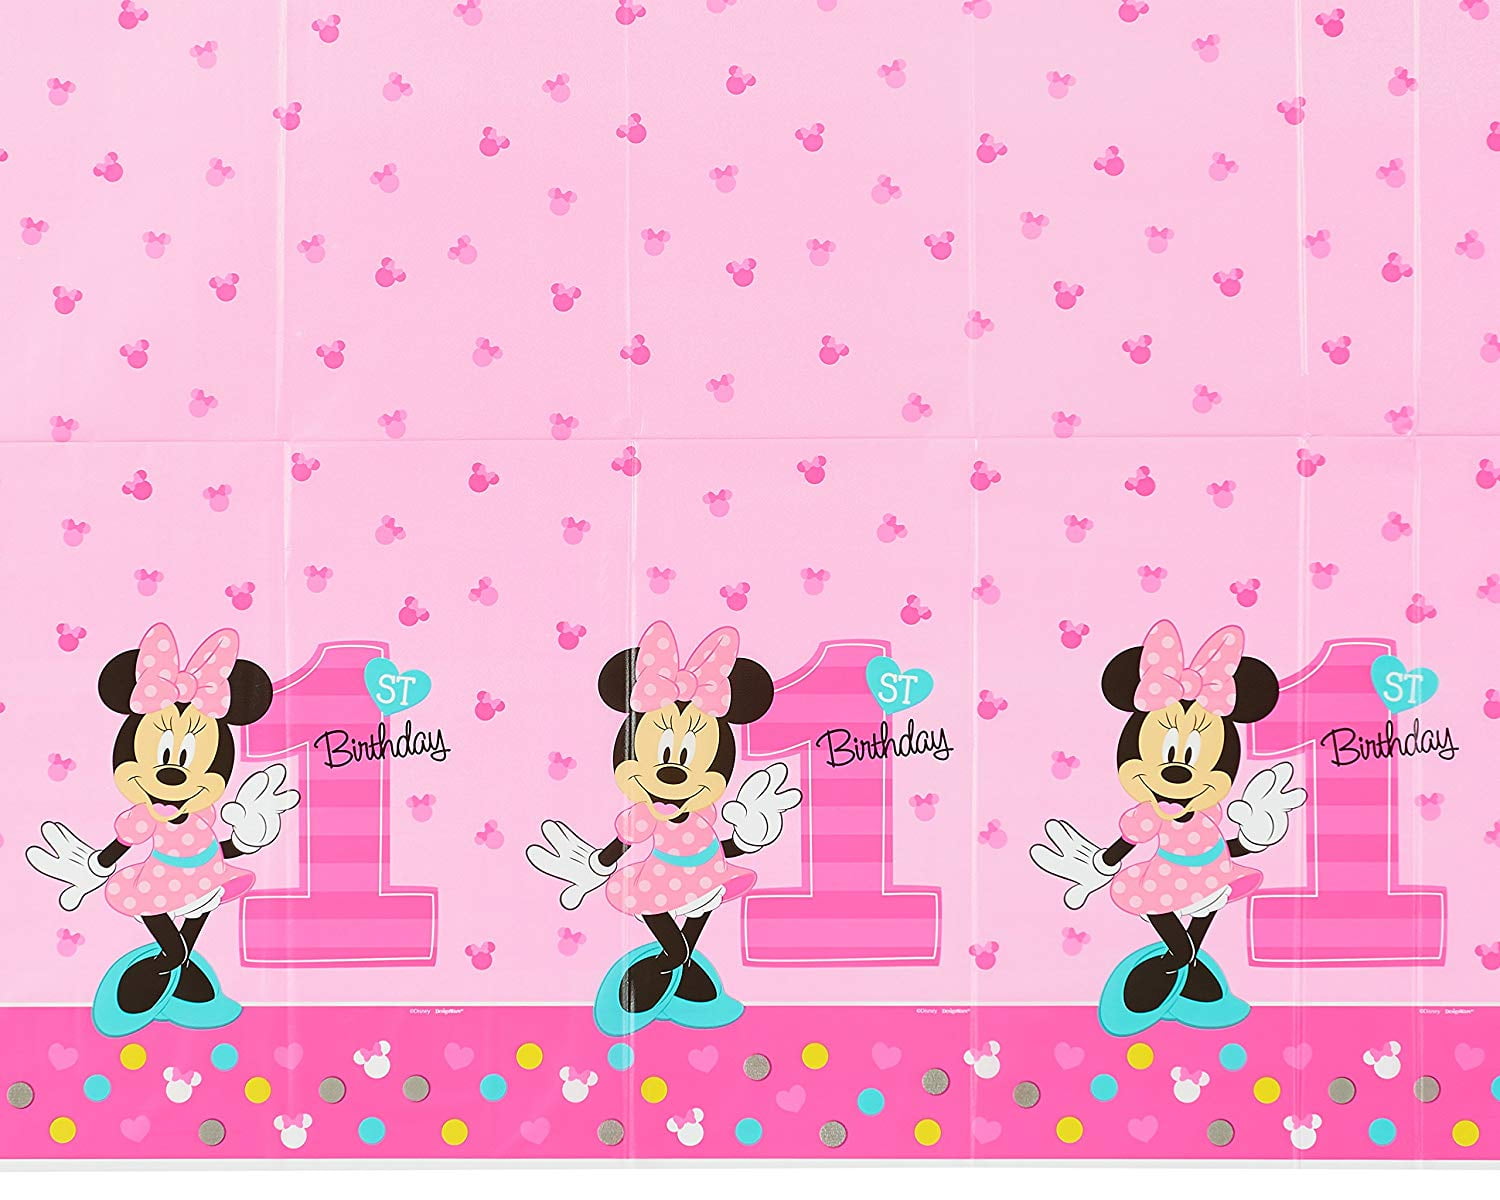 Girls Official Minnie Mouse Party Table Cover Cloth 120cm x 180cm Reusable